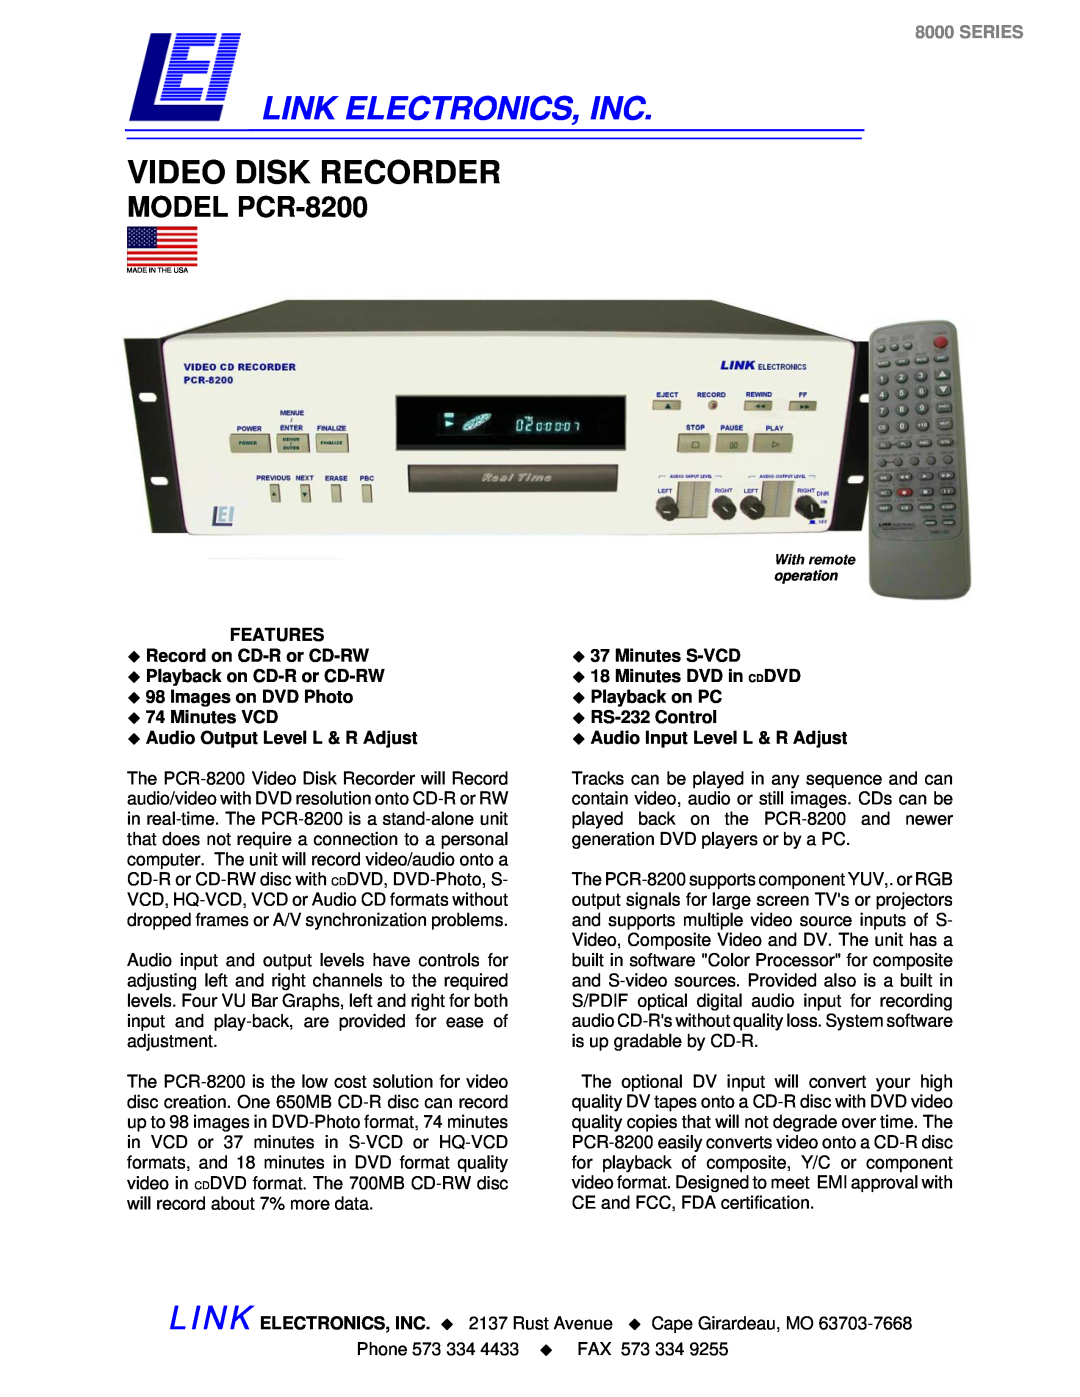 Link electronic PCR-8200 manual FEATURES ‹ Record on CD-R or CD-RW ‹ Playback on CD-R or CD-RW, Link Electronics, Inc 